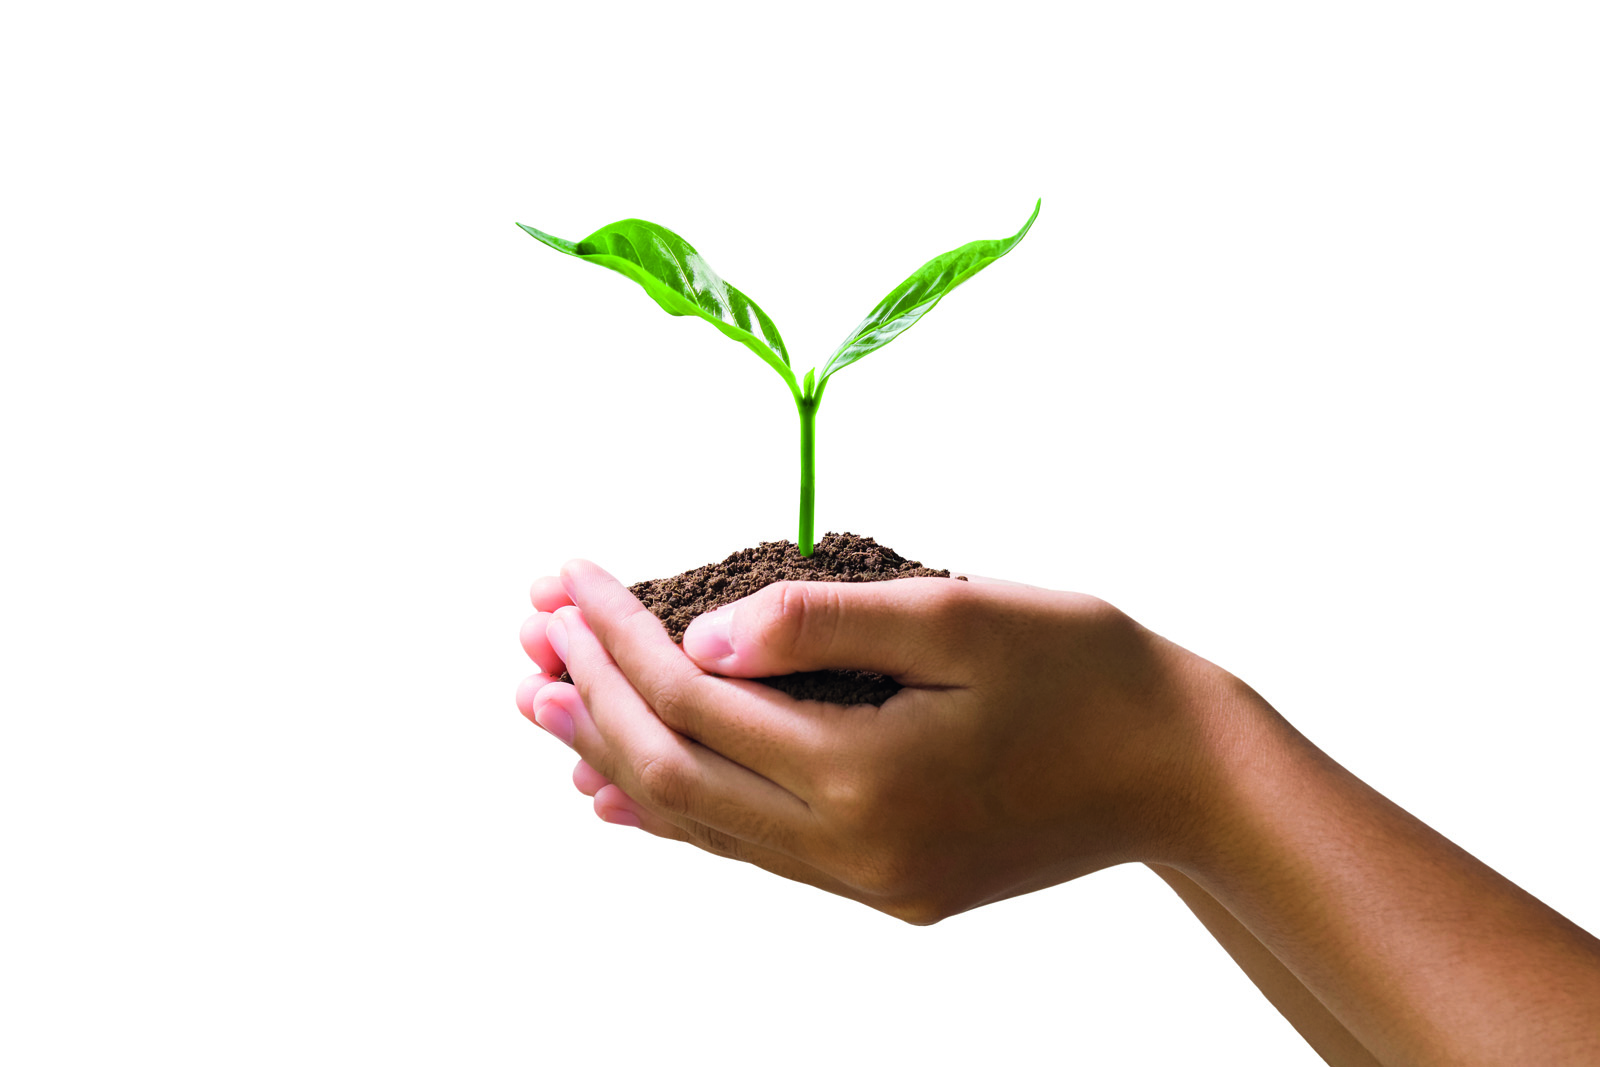 Hands holding a seedling in some soil